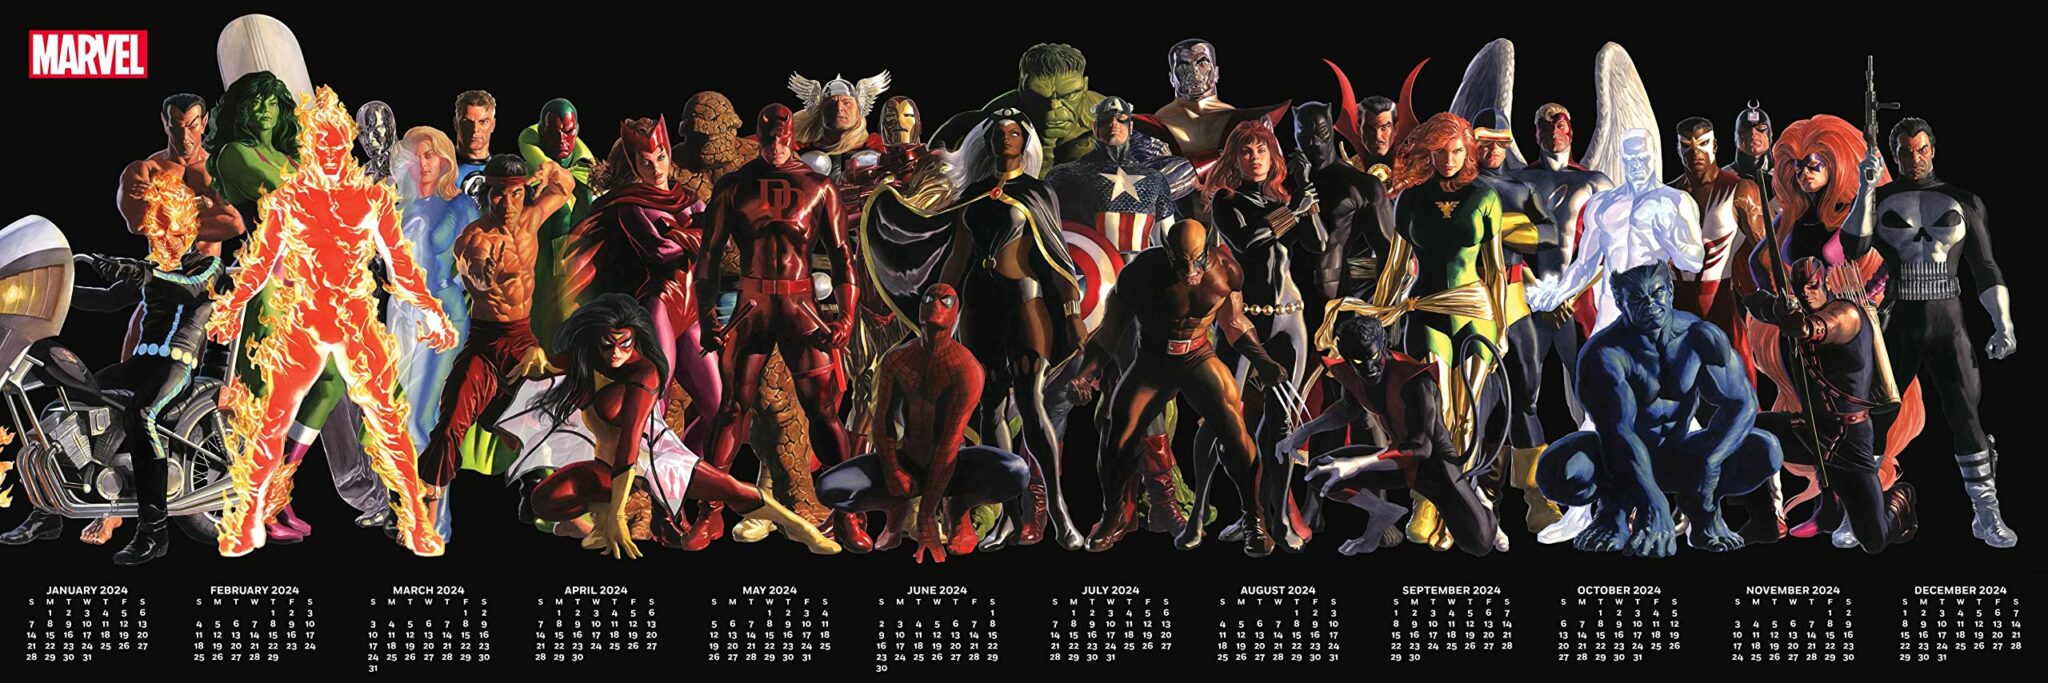 Your Second Chance ALEX ROSS’ Huge MARVEL MURAL Calendar to Get New